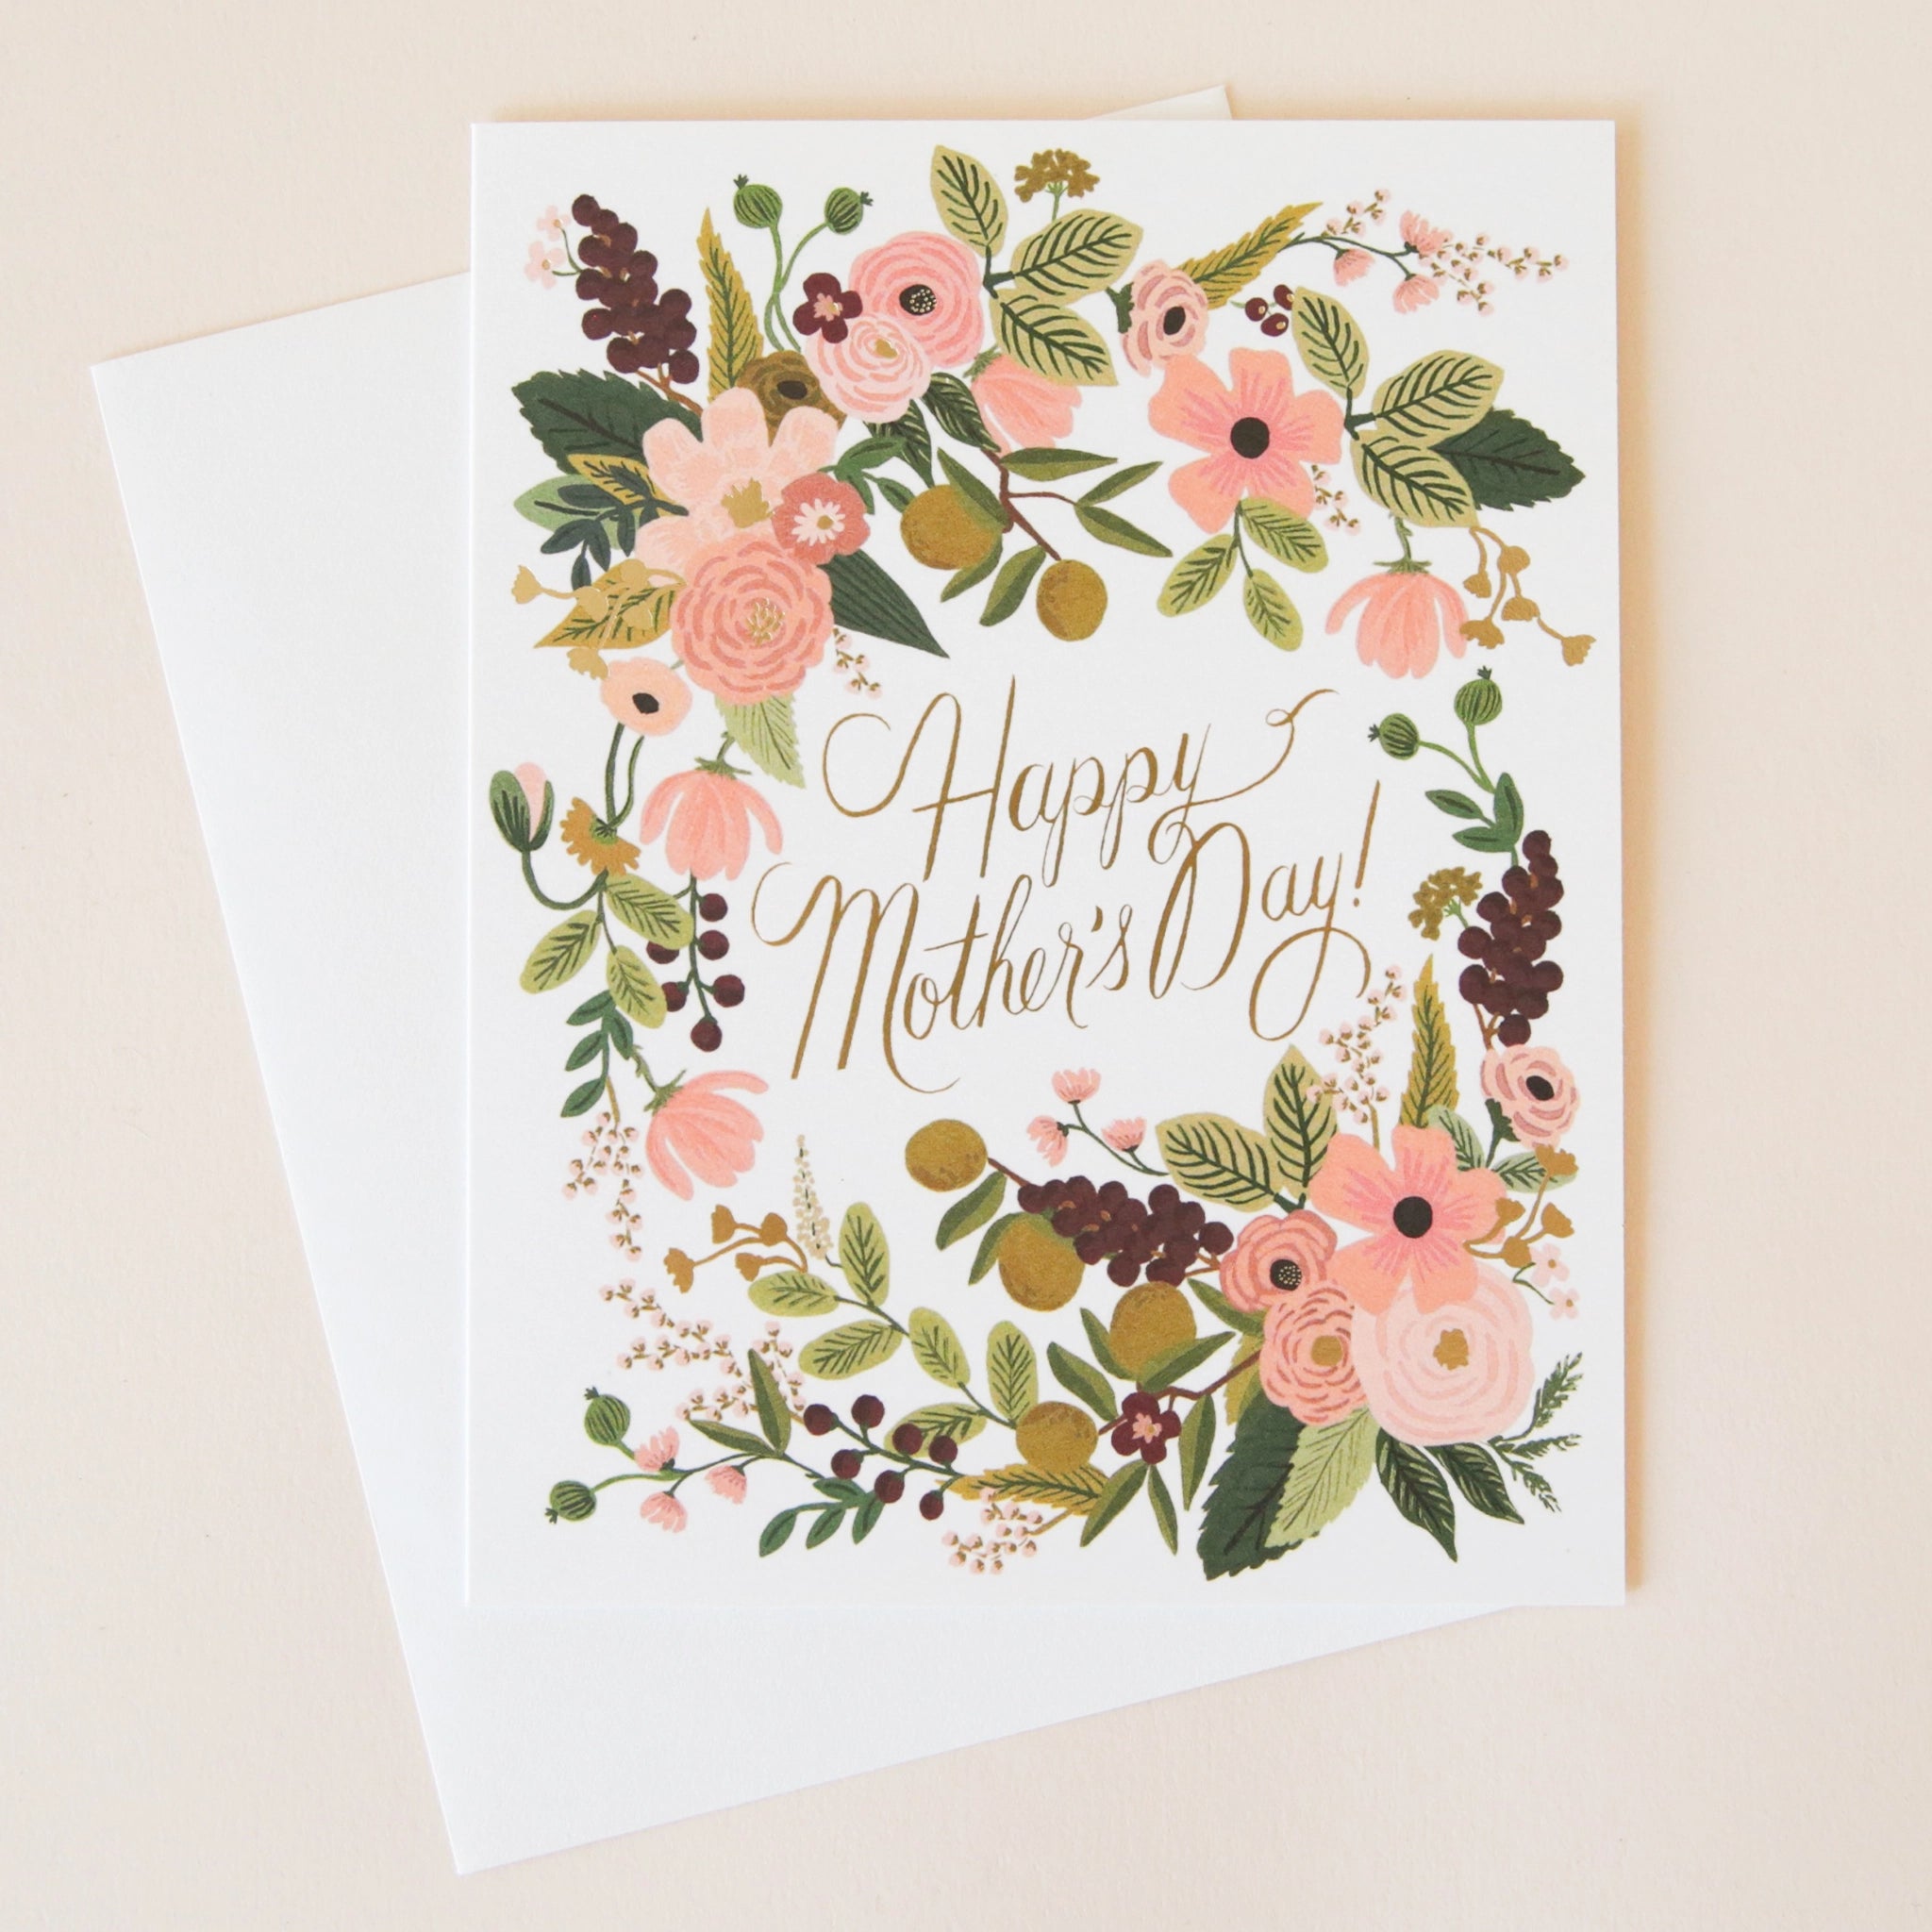 On a cream background is a white card with a pink and green floral design around the edges and text in the center that reads, &quot;Happy Mother&#39;s Day!&quot; along with a white envelope.